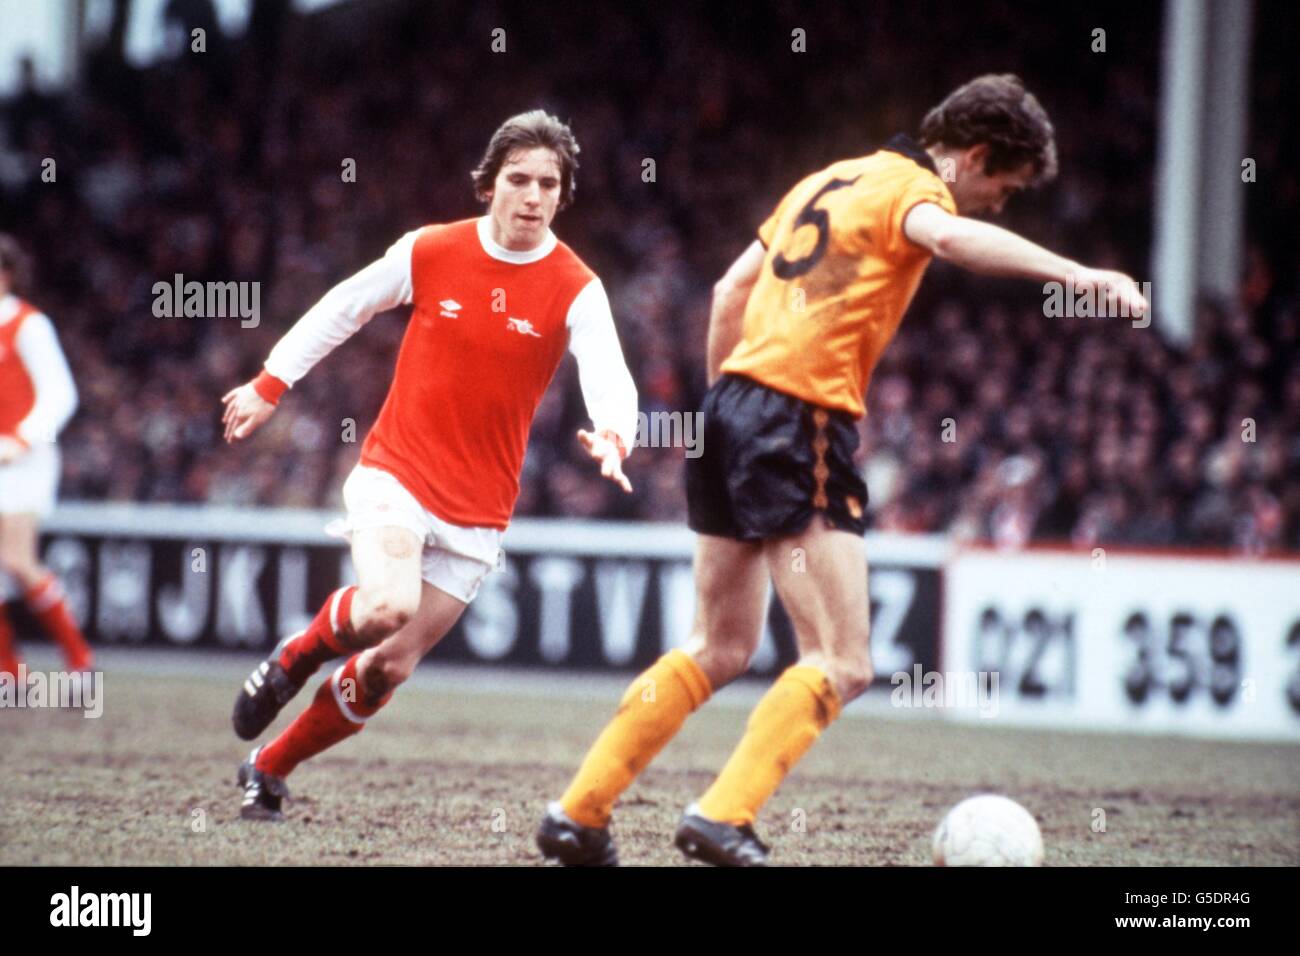 Football - League Division One - Arsenal / Wolverhampton Wanderers. Steve Gatting, Arsenal Banque D'Images